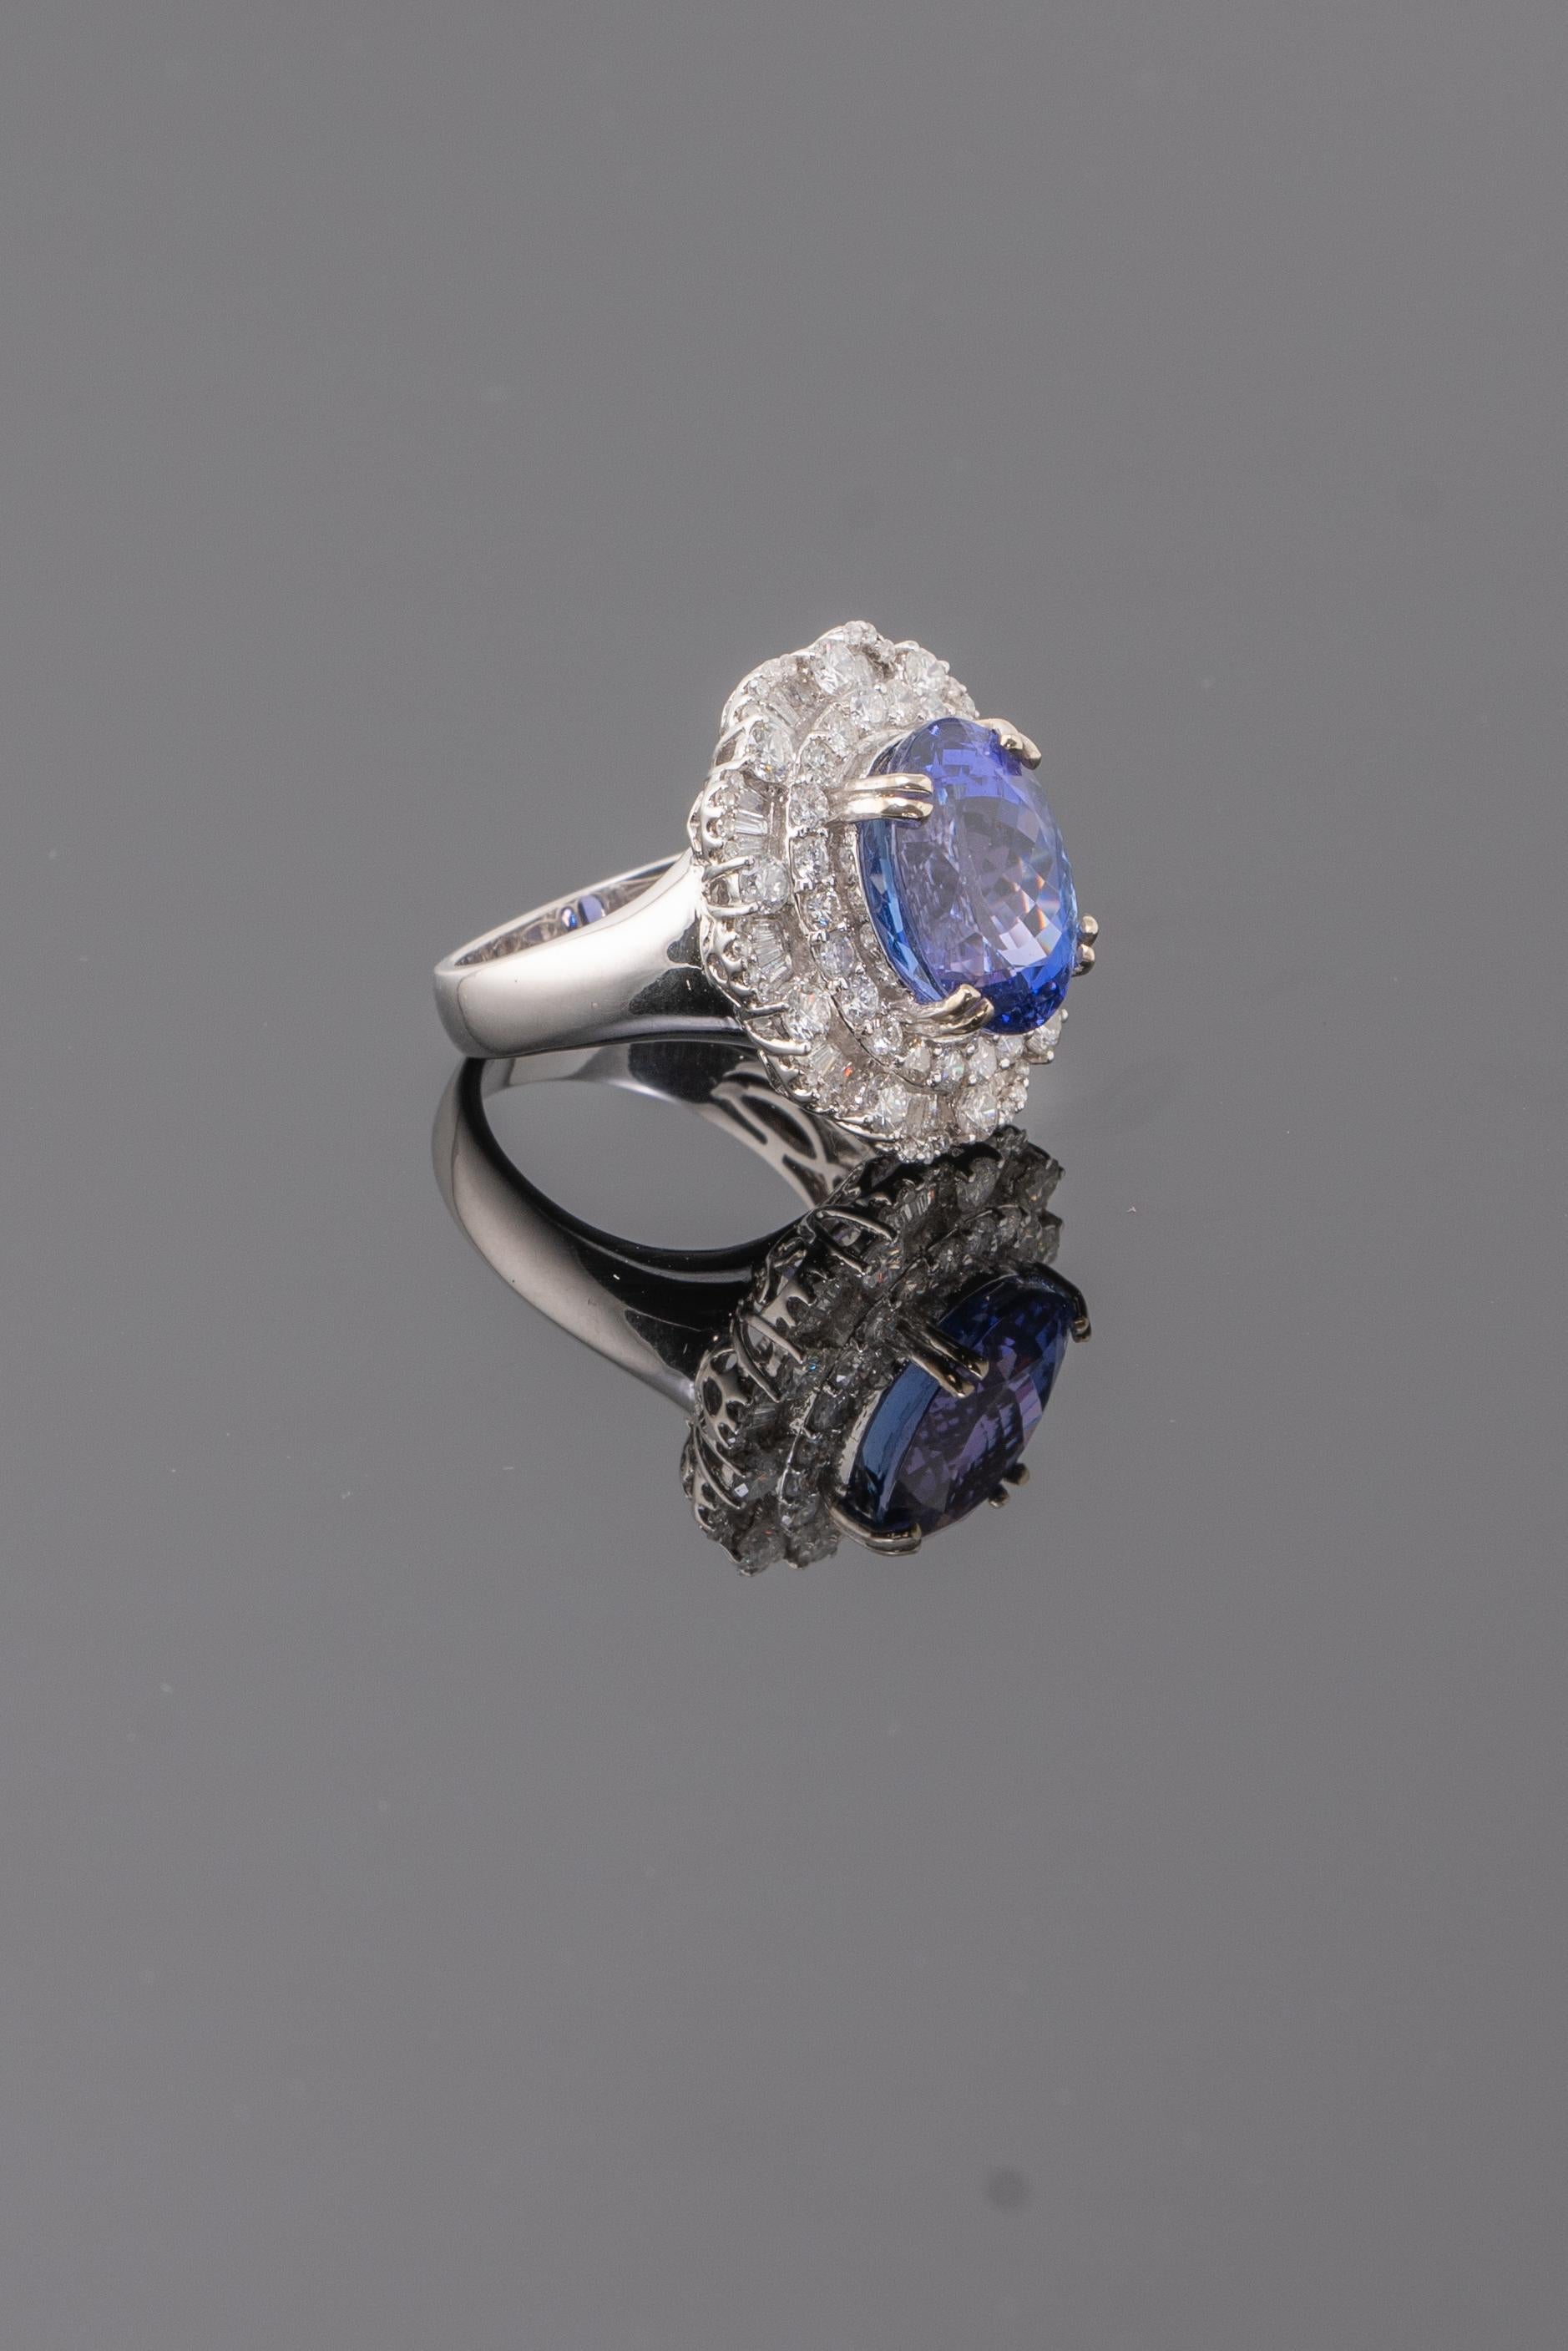 Treat yourself to a true blue beauty with this Tanzanite and Diamond cocktail ring! The natural 7.54 carat Tanzanite has a great color and luster, with absolutely no inclusions. Around 2.2 carat of VS quality round and baguette White Diamonds are